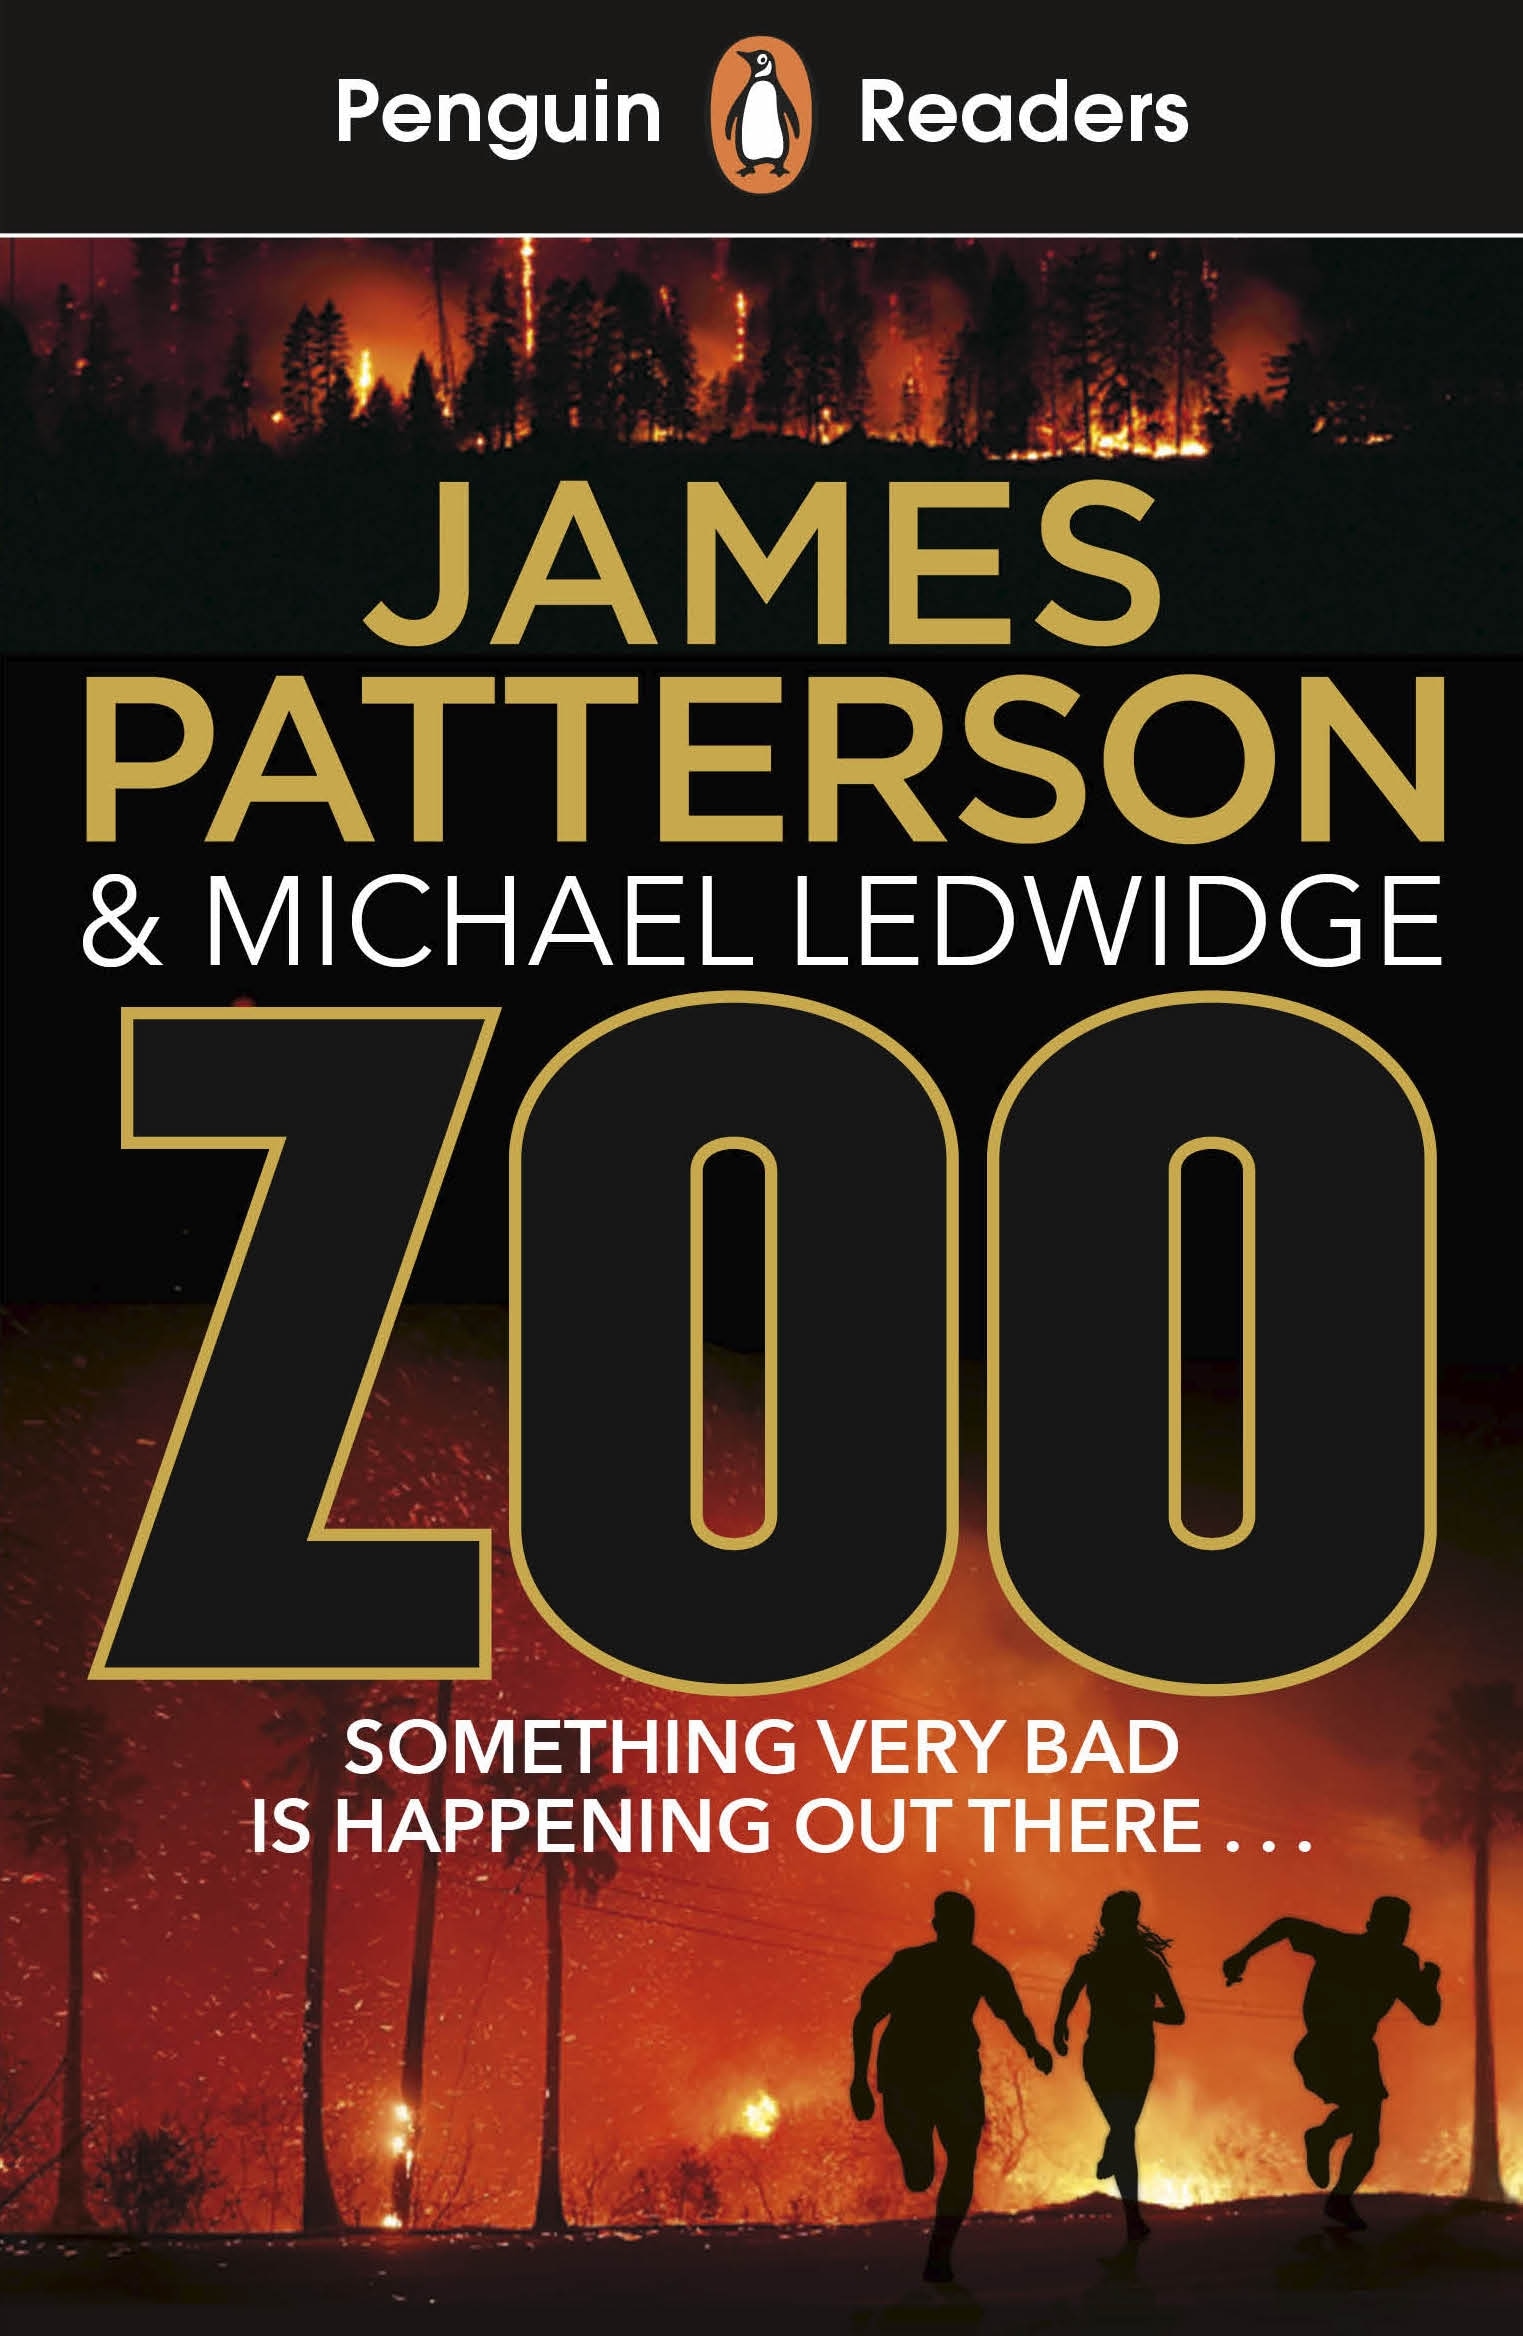 Book “Penguin Readers Level 3: Zoo (ELT Graded Reader)” by James Patterson